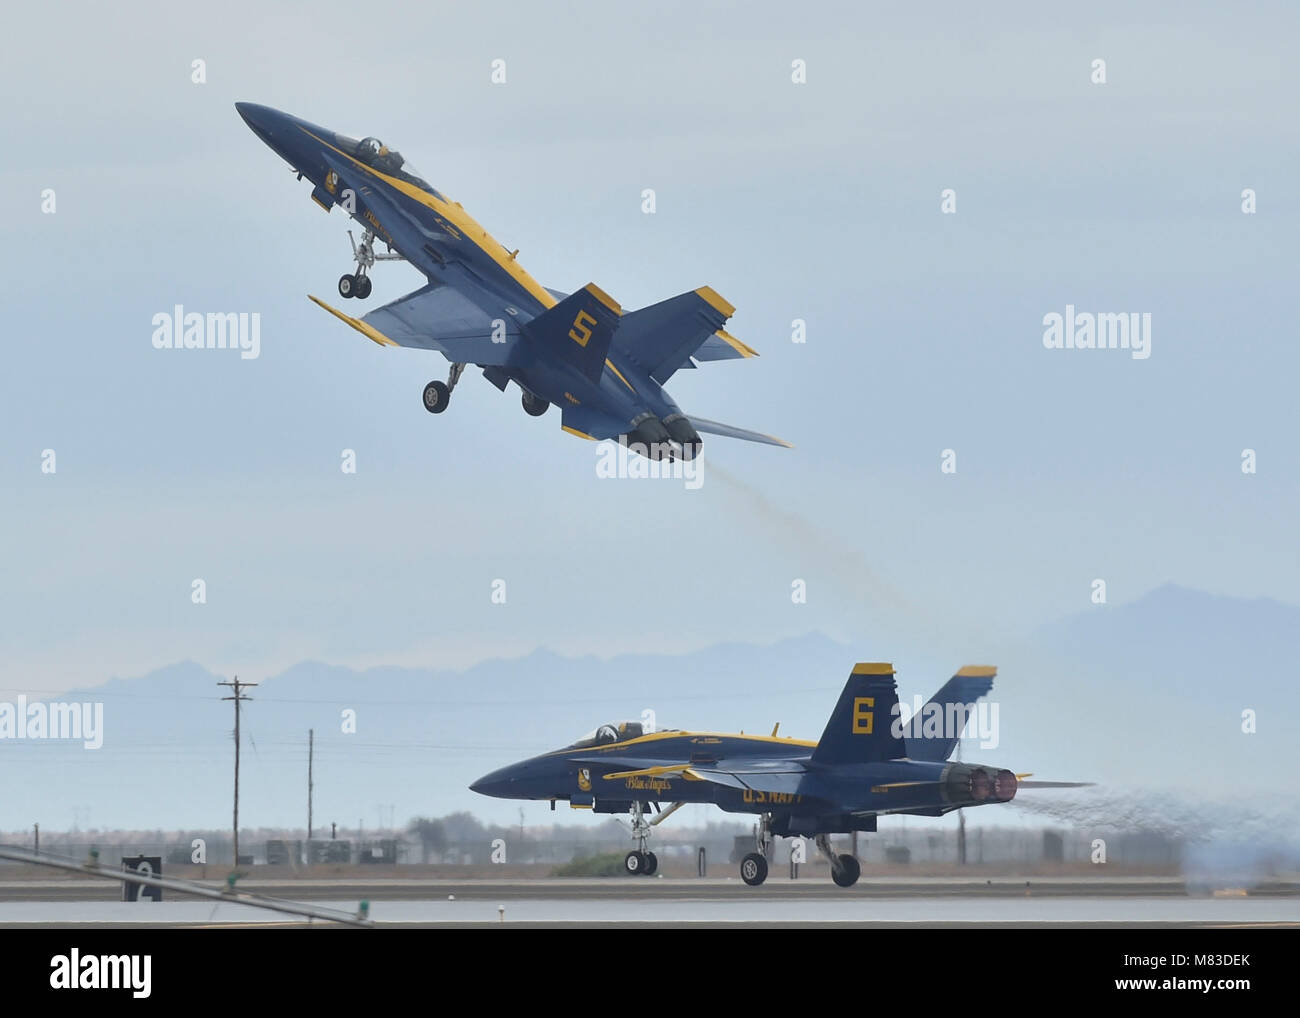 180310-N-ZC358-080  NAF EL CENTRO, Calif. (March 10, 2018) Blue Angels Lead Solo Pilot, Lt. Tyler Davies, performs a Dirty Roll on Takeoff, while Opposing Solo Pilot, Lt. Brandon Hempler, prepares to perform a Low Transition to High Performance Climb, during the NAF El Centro 2018 Air Show. The Blue Angels are scheduled to perform more than 60 demonstrations at more than 30 locations across the U.S. in 2018. (U.S. Navy photo by Mass Communication Specialist 2nd Class Jess Gray/Released) Stock Photo